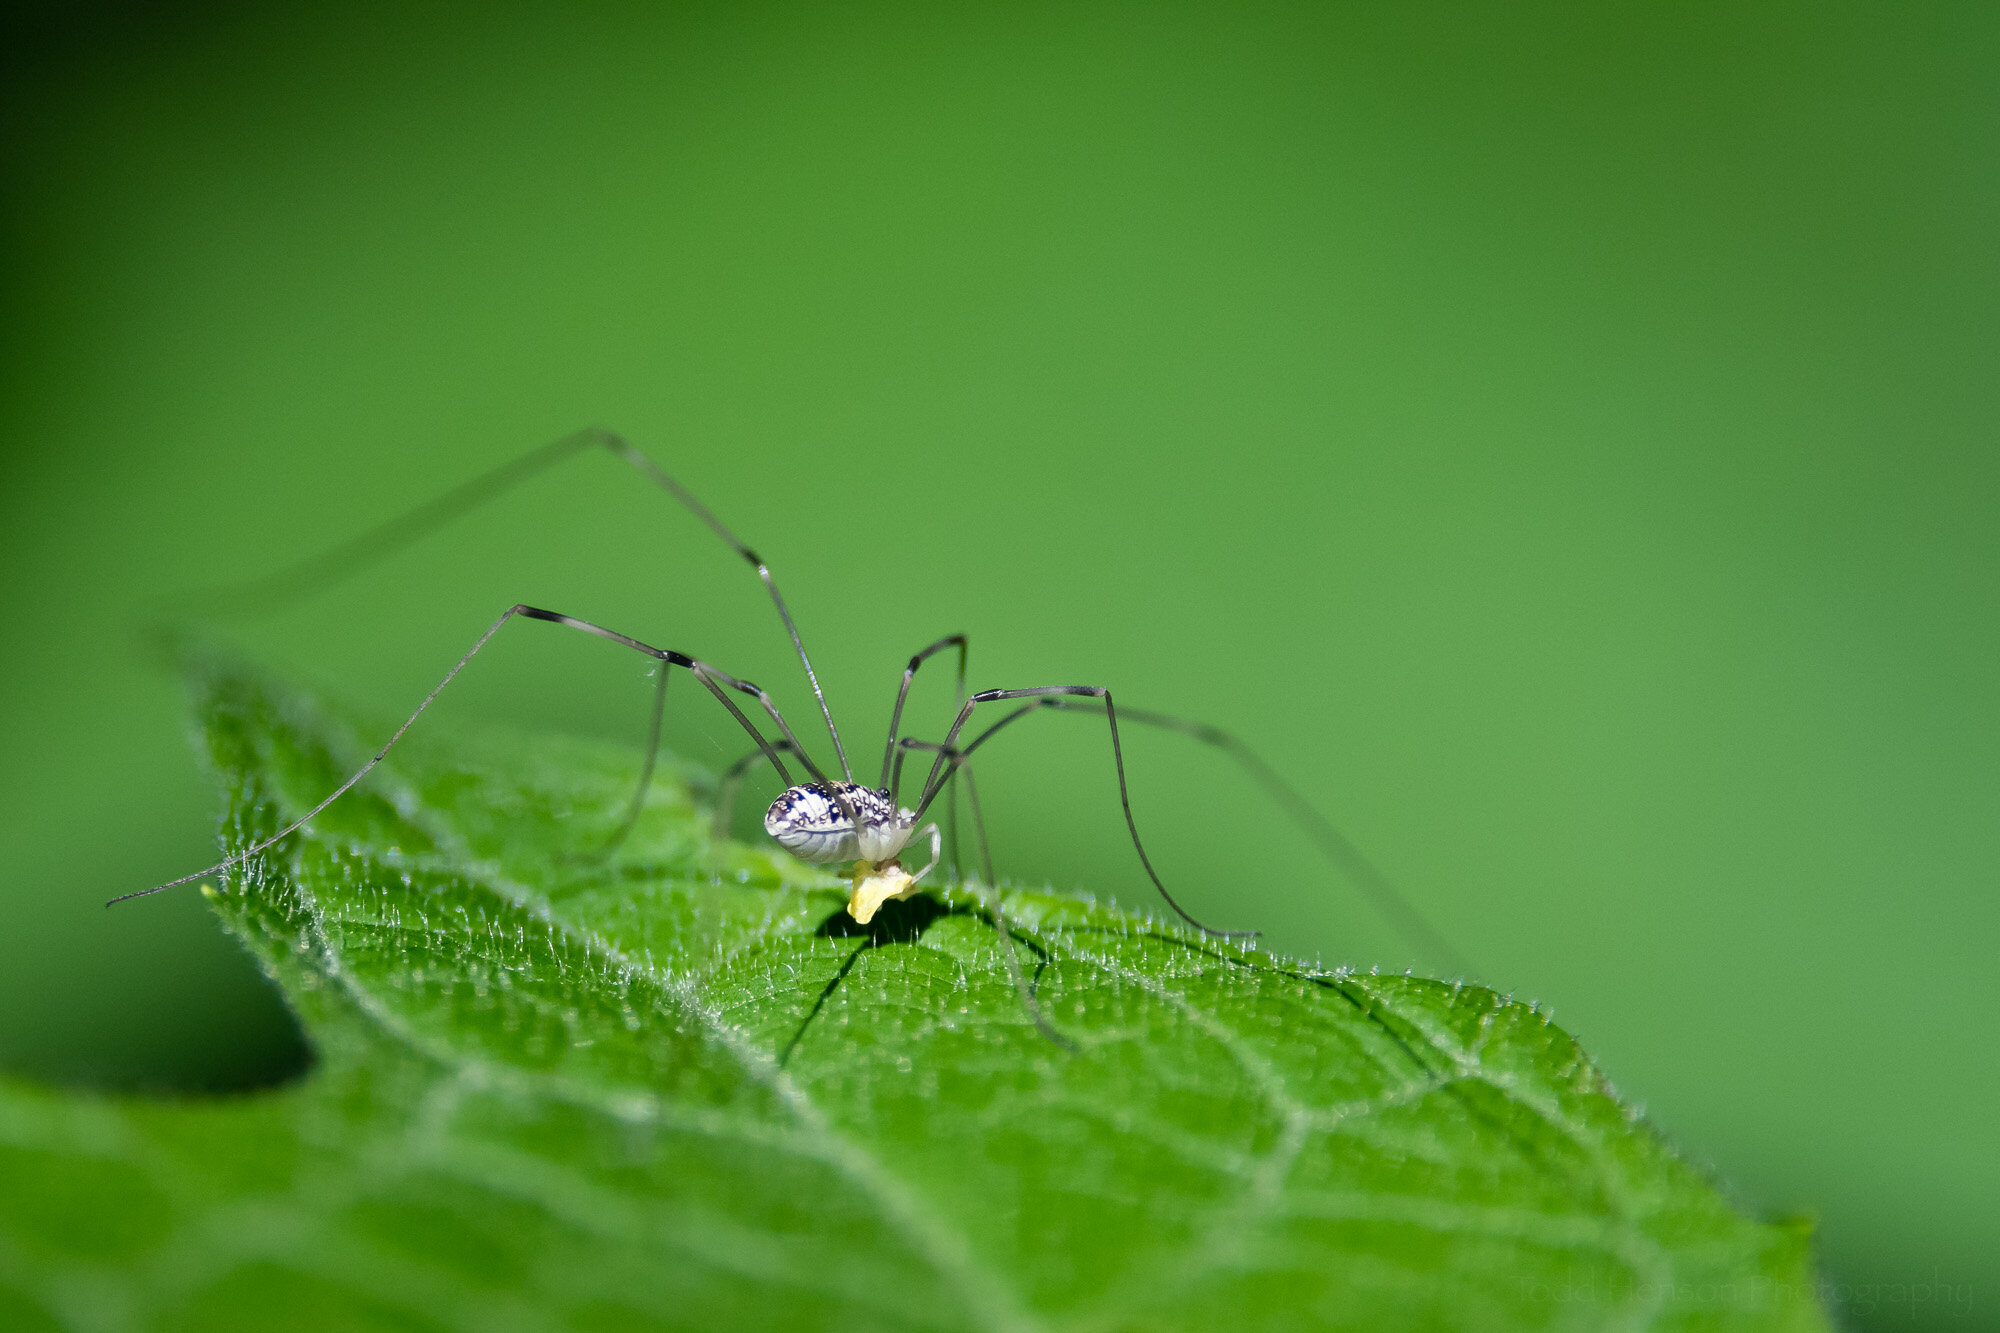 What Is the Harvestman Harvesting?